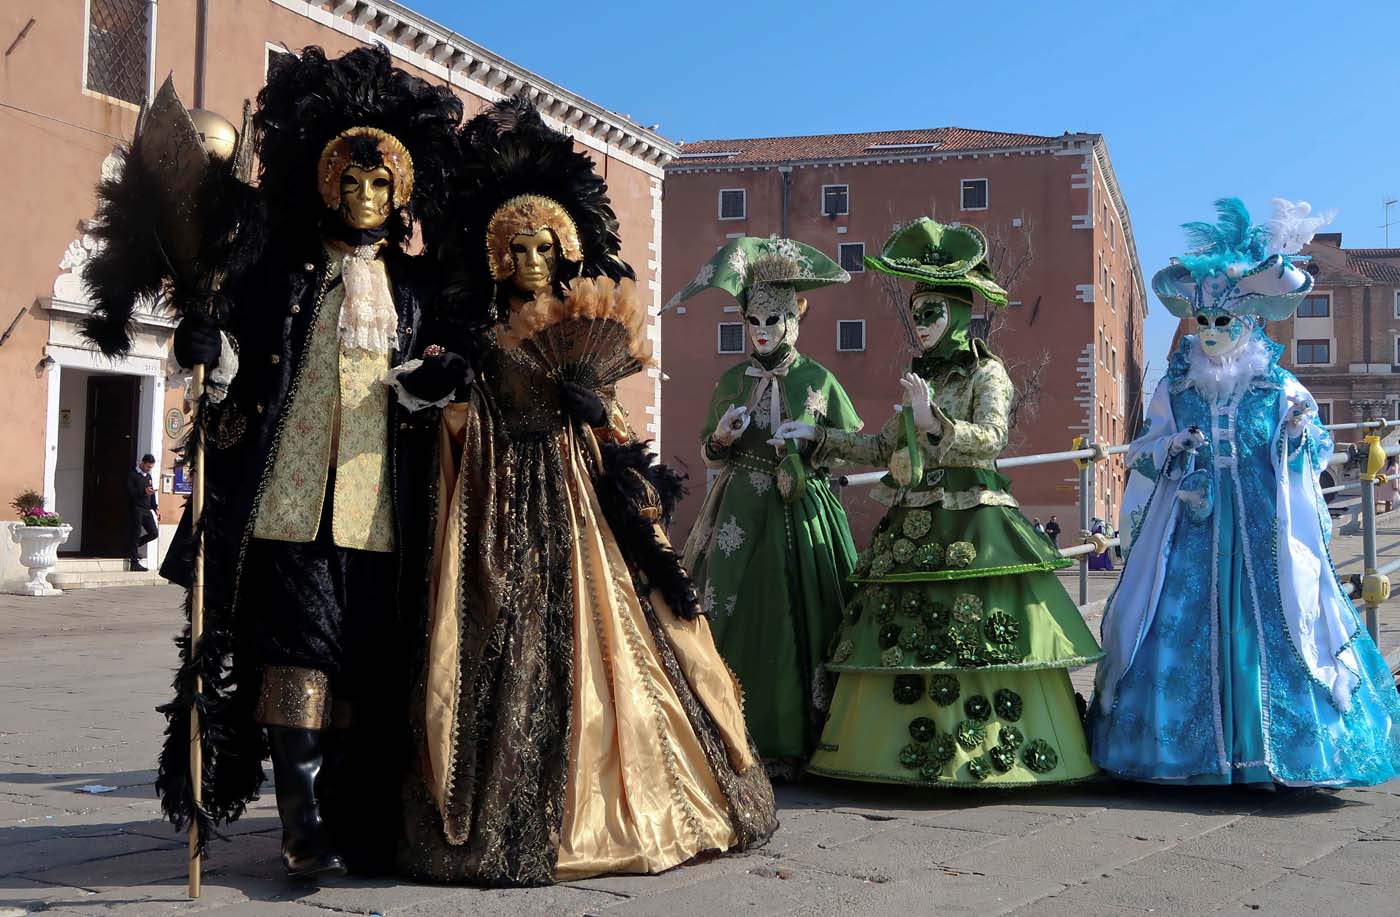 Masked revellers pose during the Venice Carnival in Venice, Italy February 20, 2017. REUTERS/Fabrizio Bensch